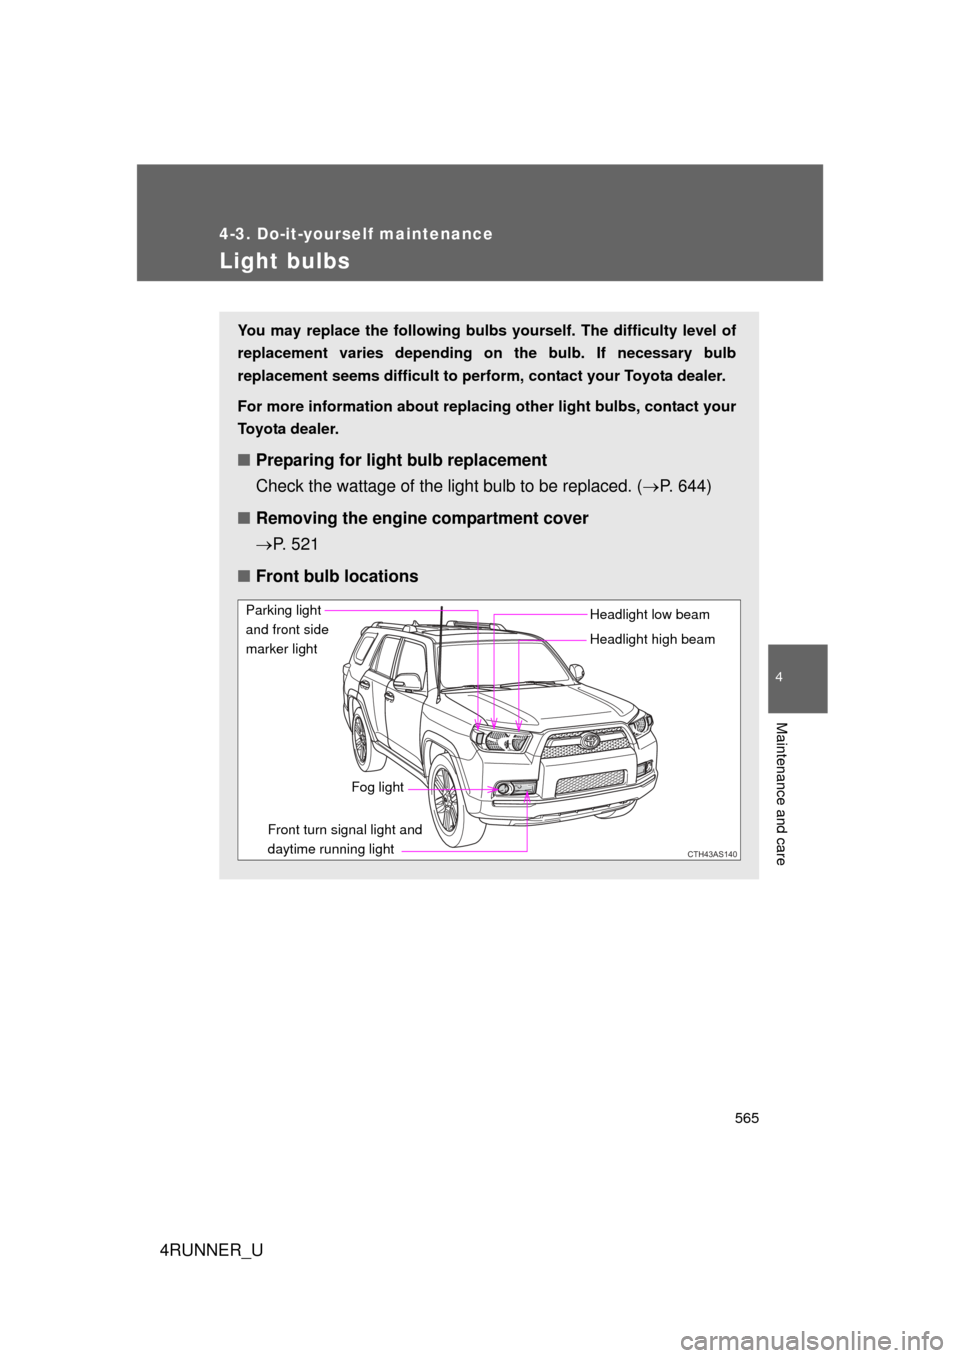 TOYOTA 4RUNNER 2012 N280 / 5.G Owners Manual 565
4-3. Do-it-yourself maintenance
4
Maintenance and care
4RUNNER_U
Light bulbs
You may replace the following bulbs yourself. The difficulty level of
replacement varies depending on the bulb. If nece